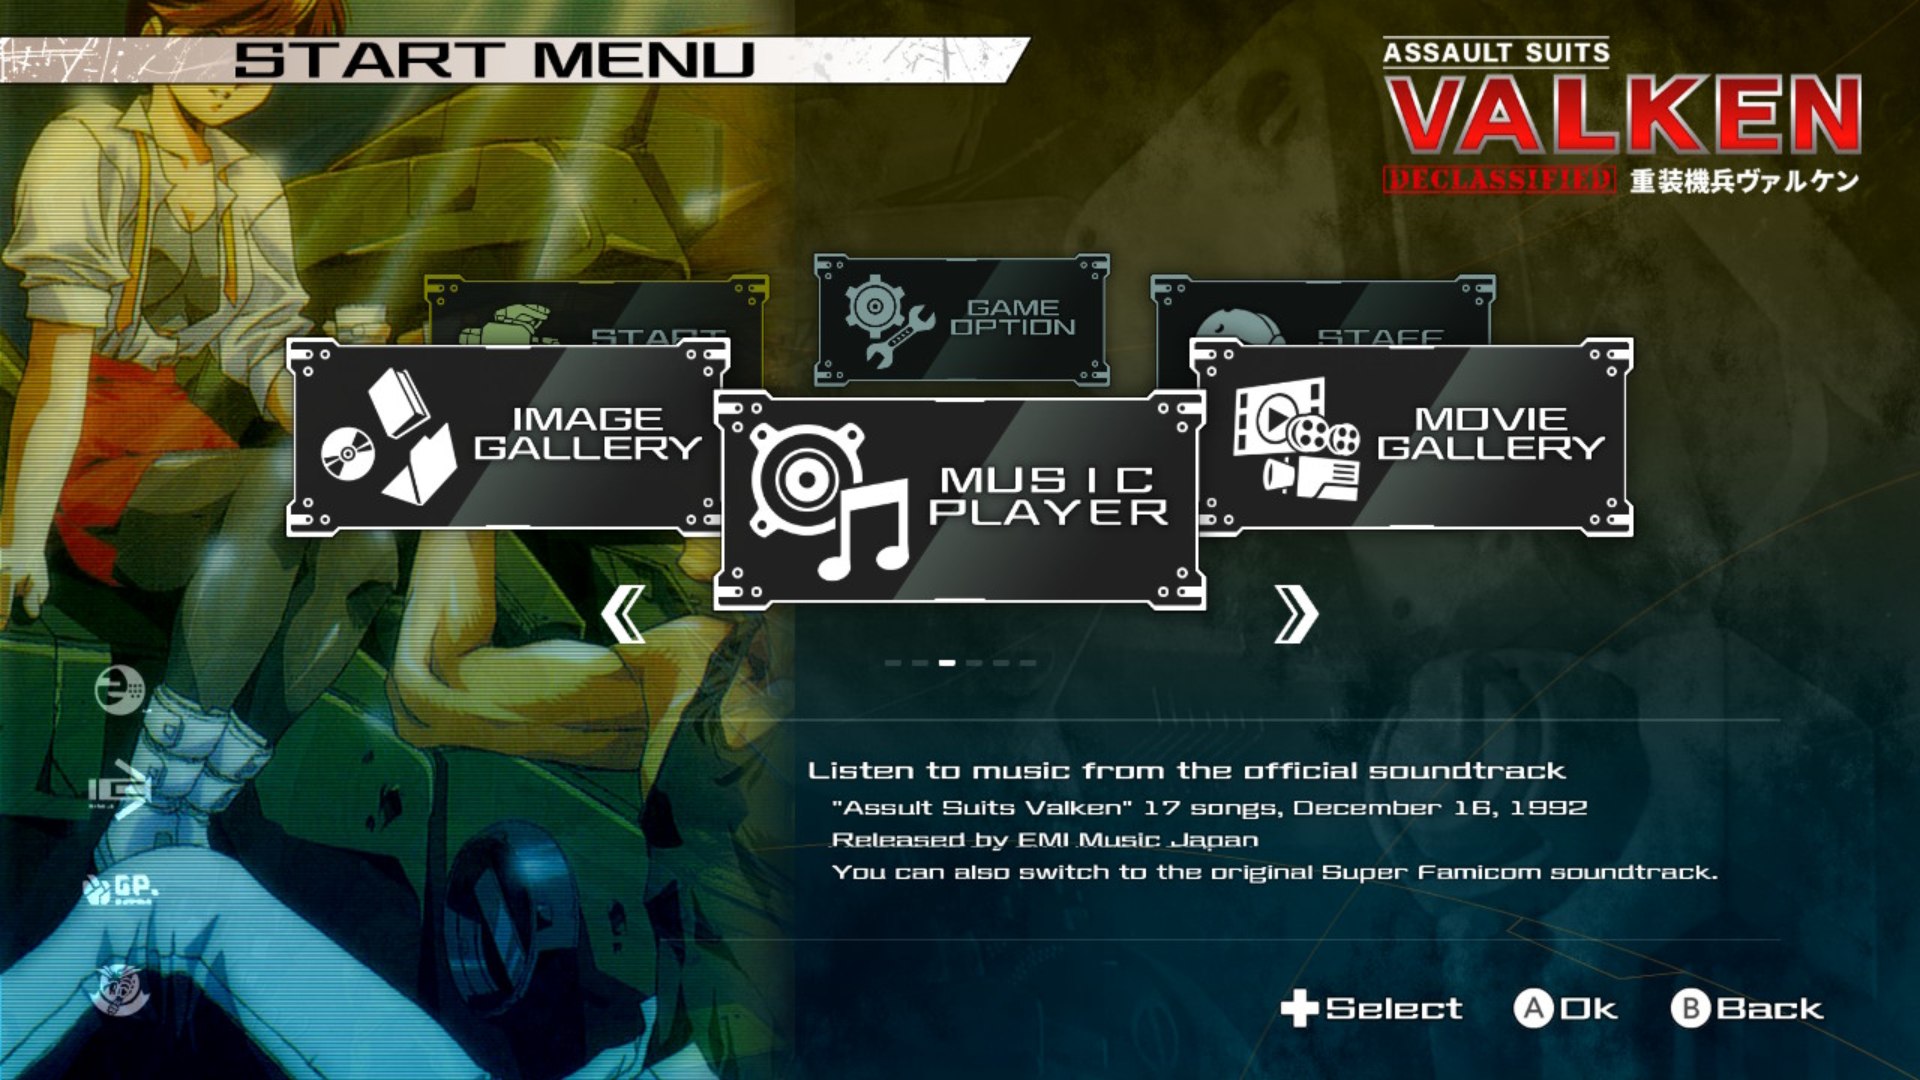 Assault Suits Valken DECLASSIFIED main menu showing music player image gallery and movie gallery icons with an image from the game in the background